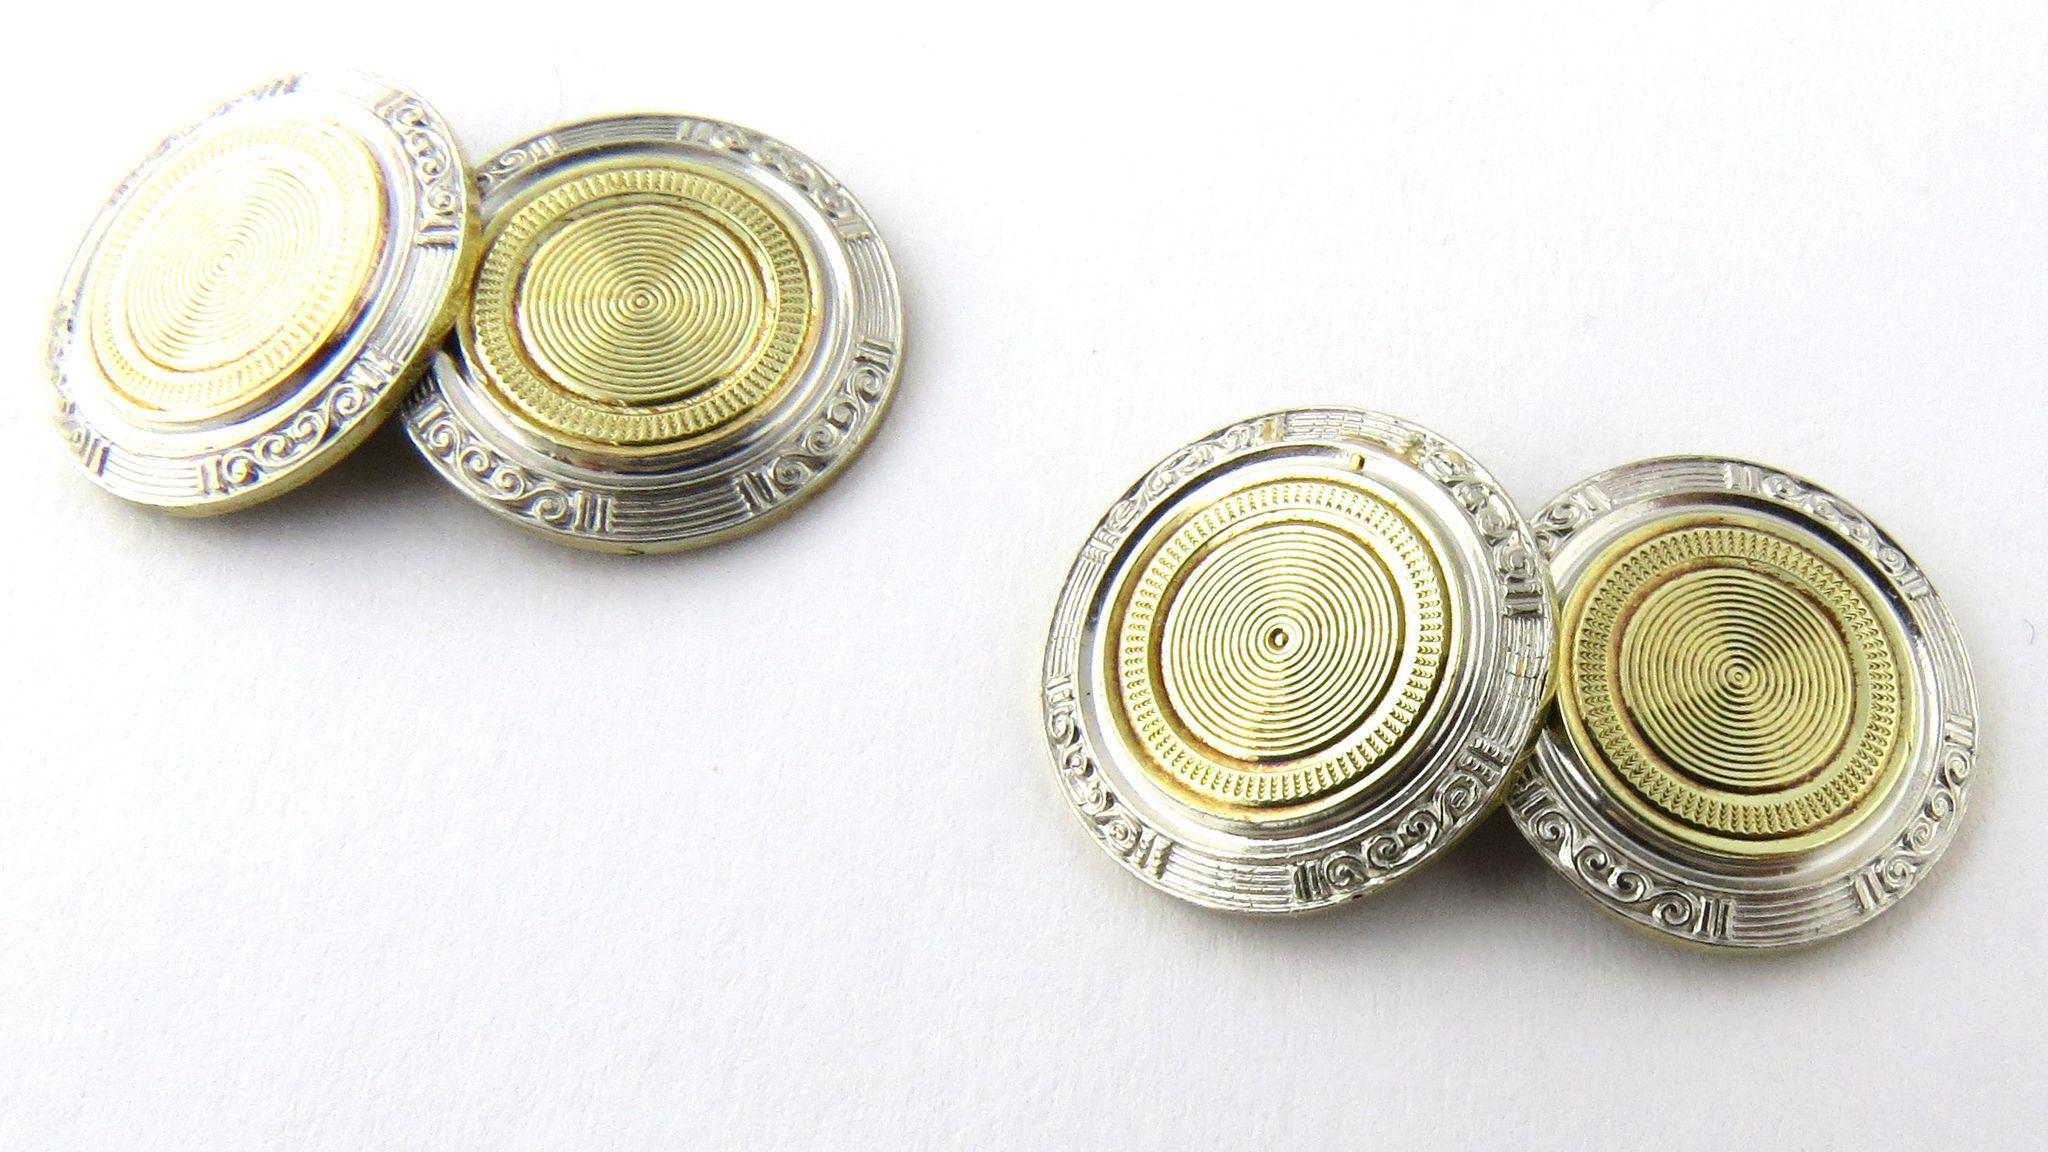 Art Deco 14K White and Gold Two Toned Engine Turned Cufflinks

 Hallmarked HW 14K 

14K engine turned center surrounded by a 14K white gold border

15 mm in diameter

 10.2 g 

6.55 dwt

 circa 1920's 

These will be packaged securely and shipped